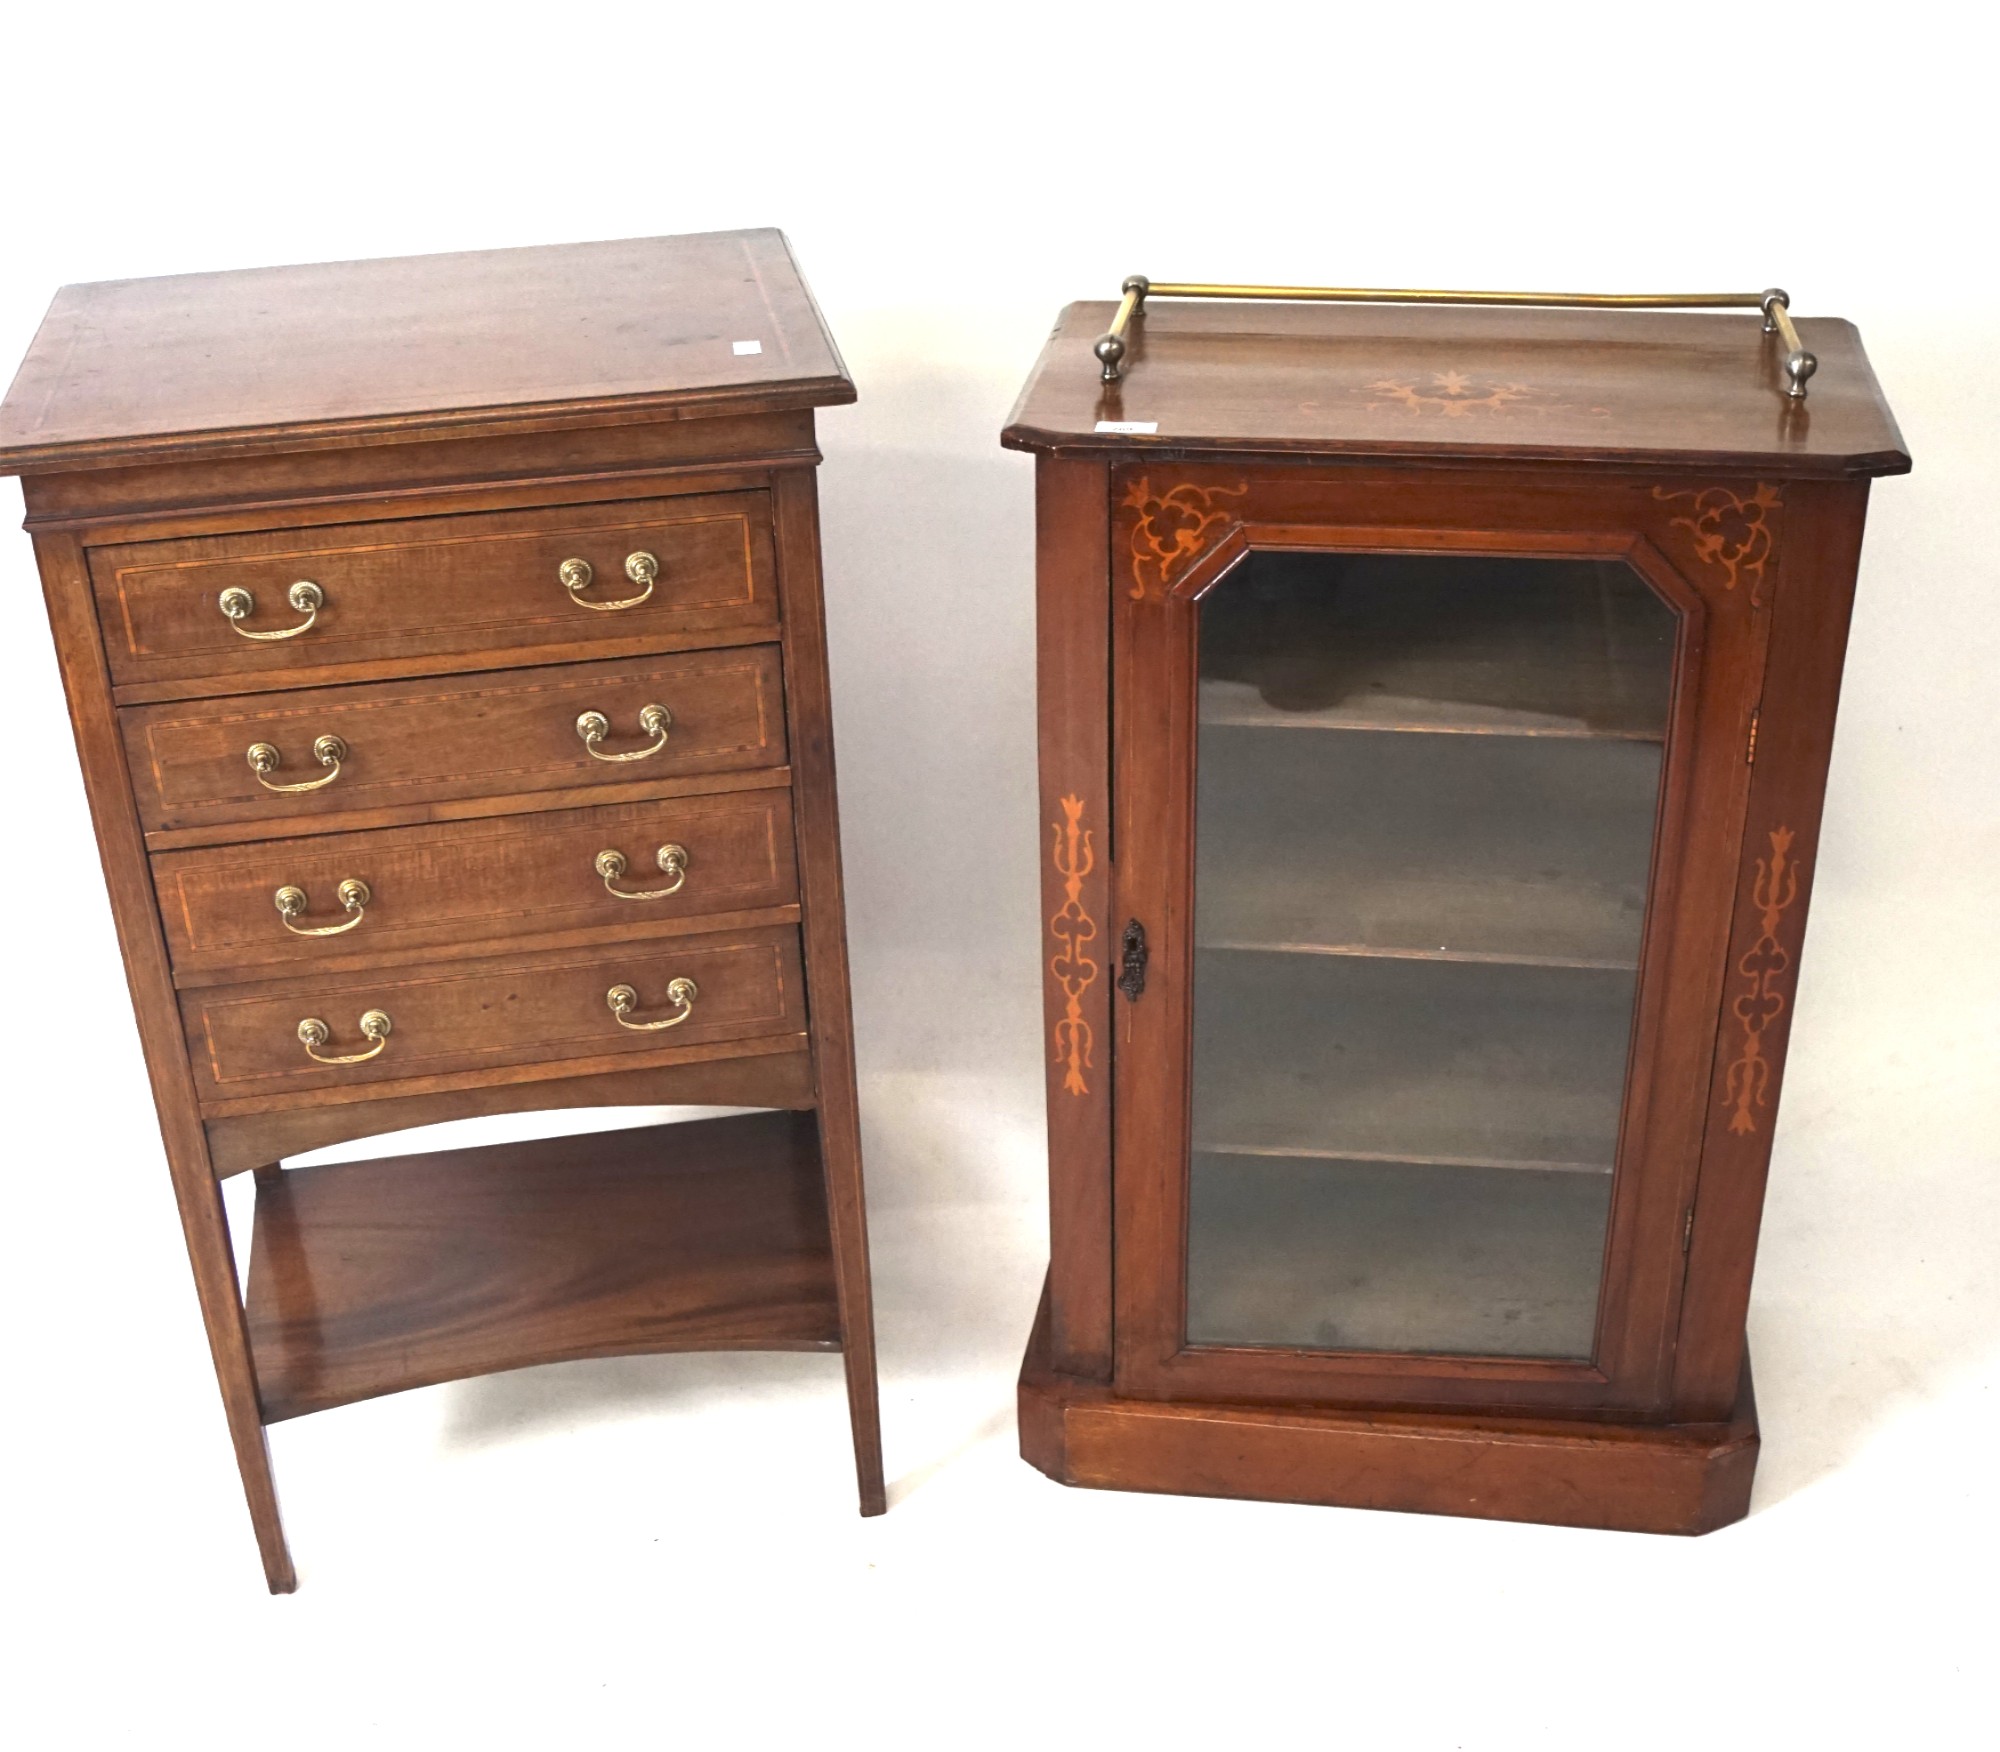 A Victorian mahogany glazed music cabinet and an Edwardian sheet music mahogany cabinet.